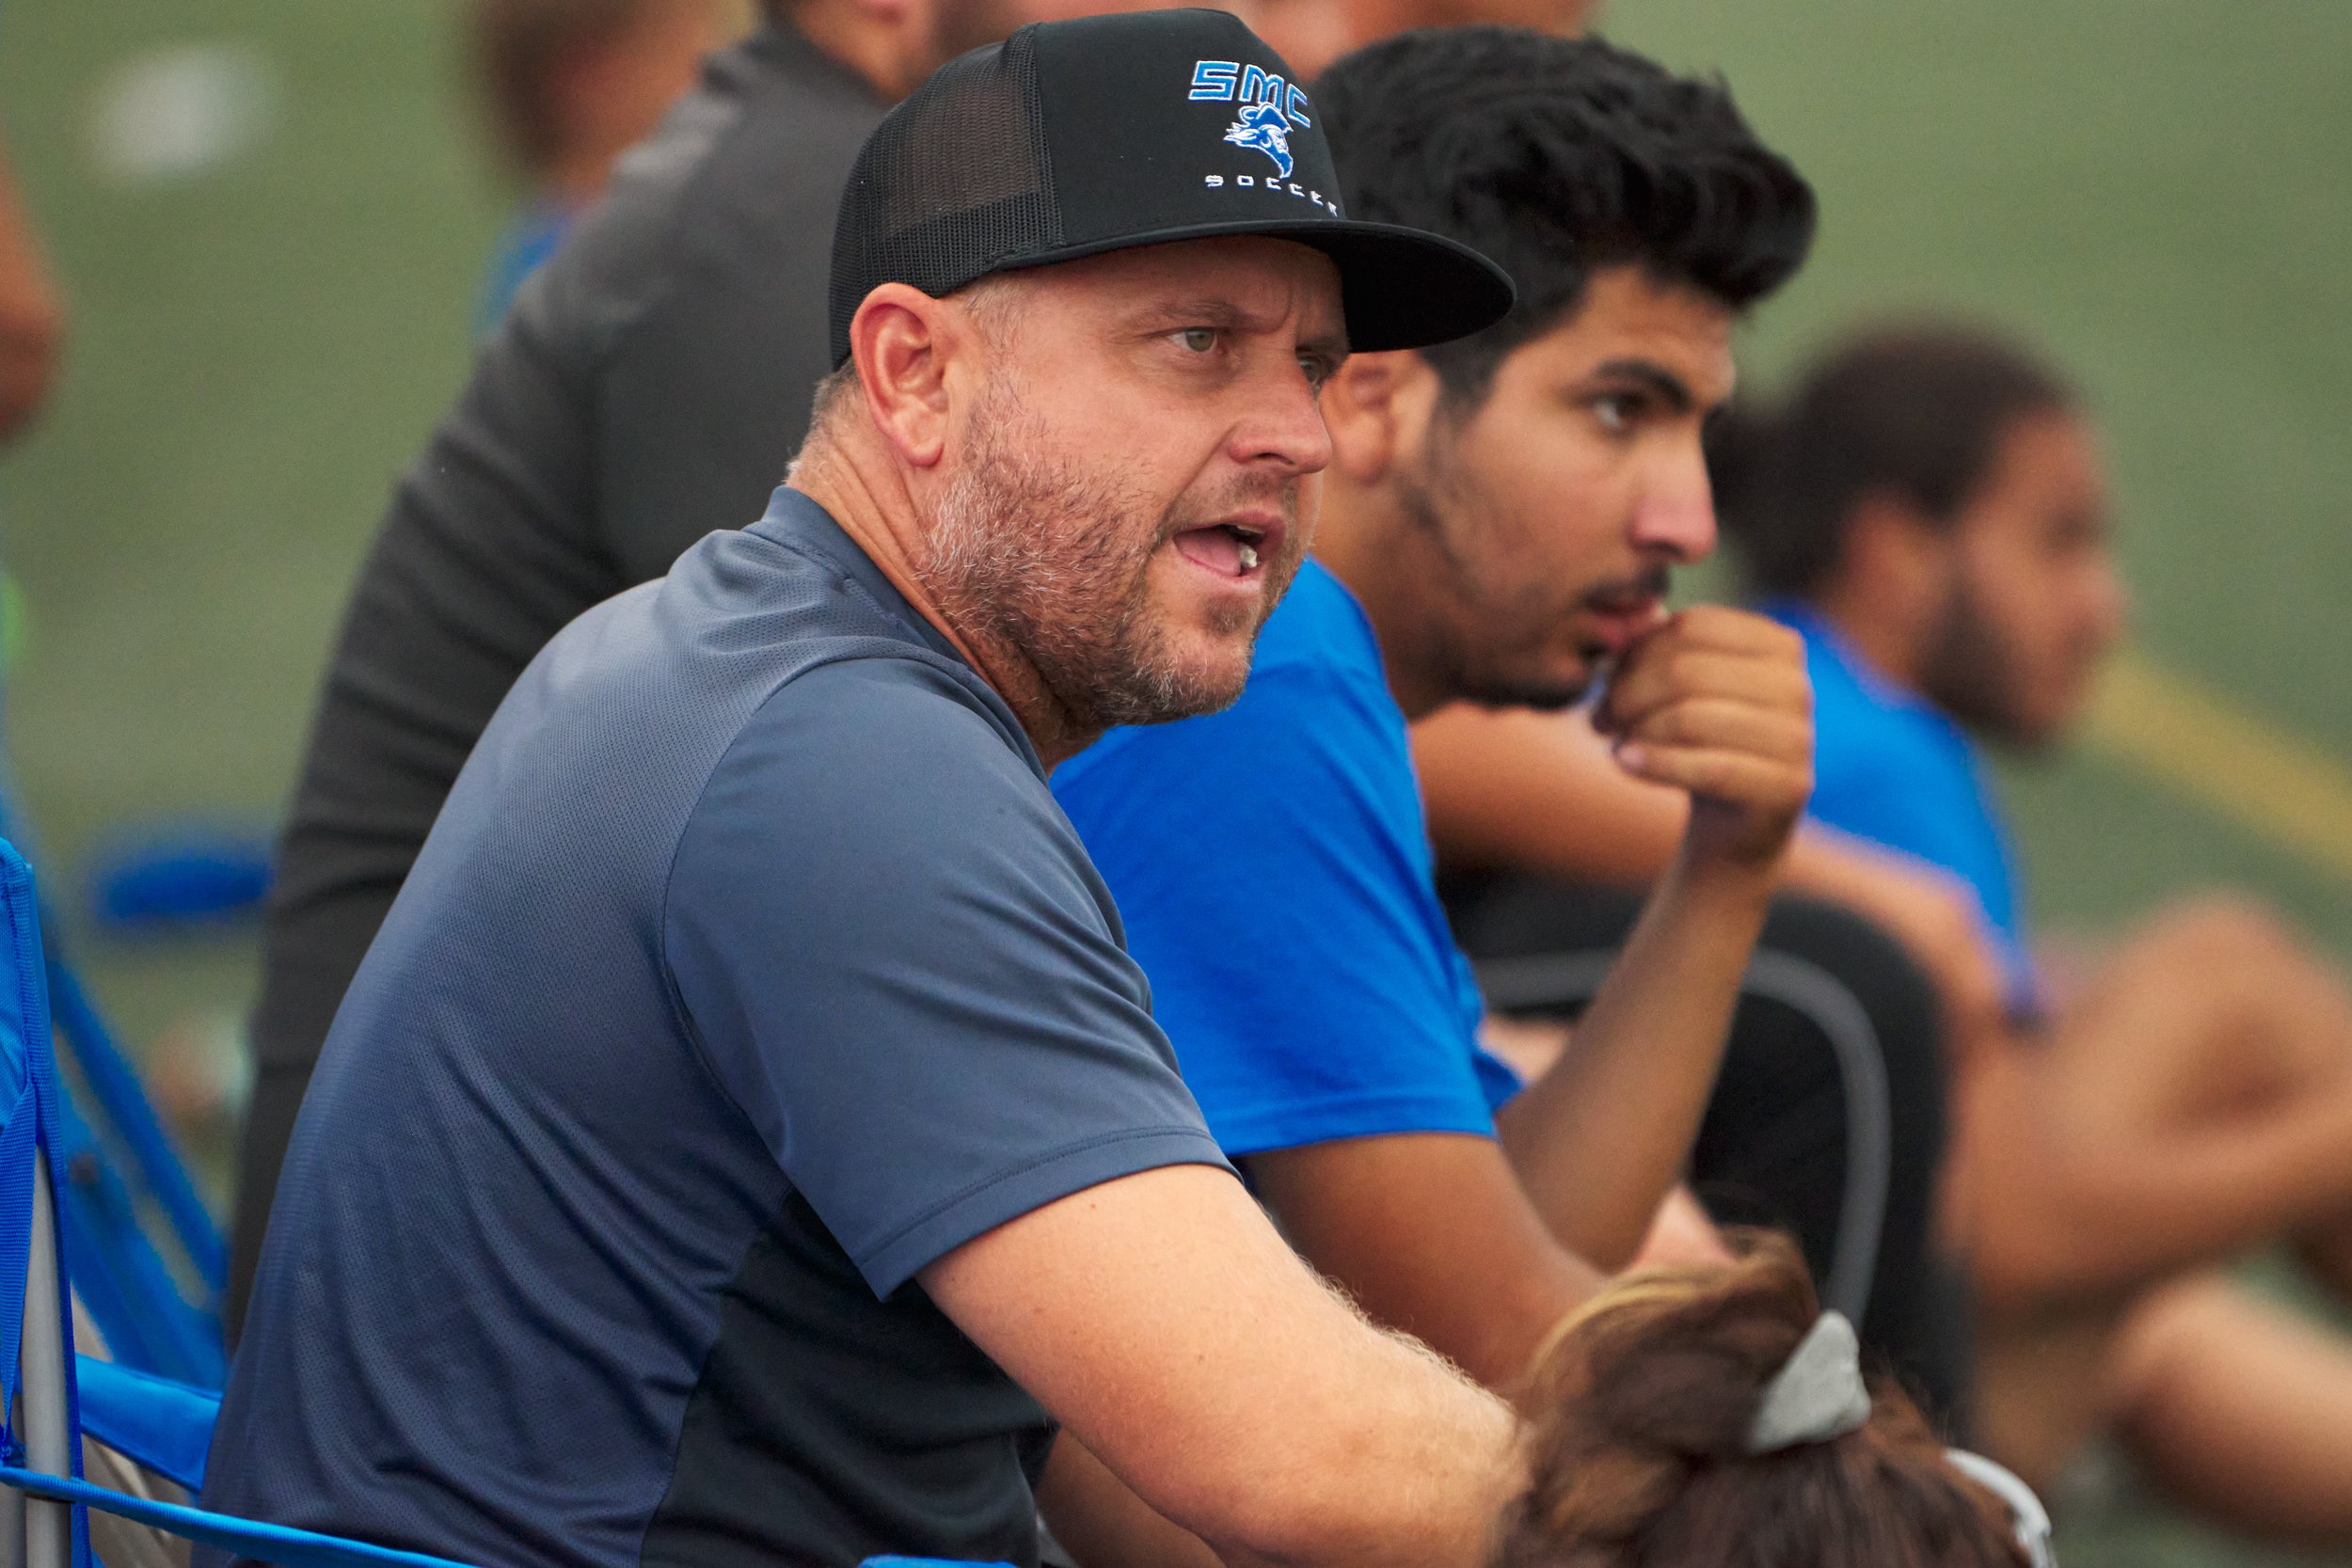  Santa Monica College Corsairs Men's Soccer Head Coach Tim Pierce during the game against the Los Angeles Harbor College Seahawks on Friday, September 9, 2022, at Corsair Field in Santa Monica, Calif. The Corsairs won 4-0. (Nicholas McCall | The Cors